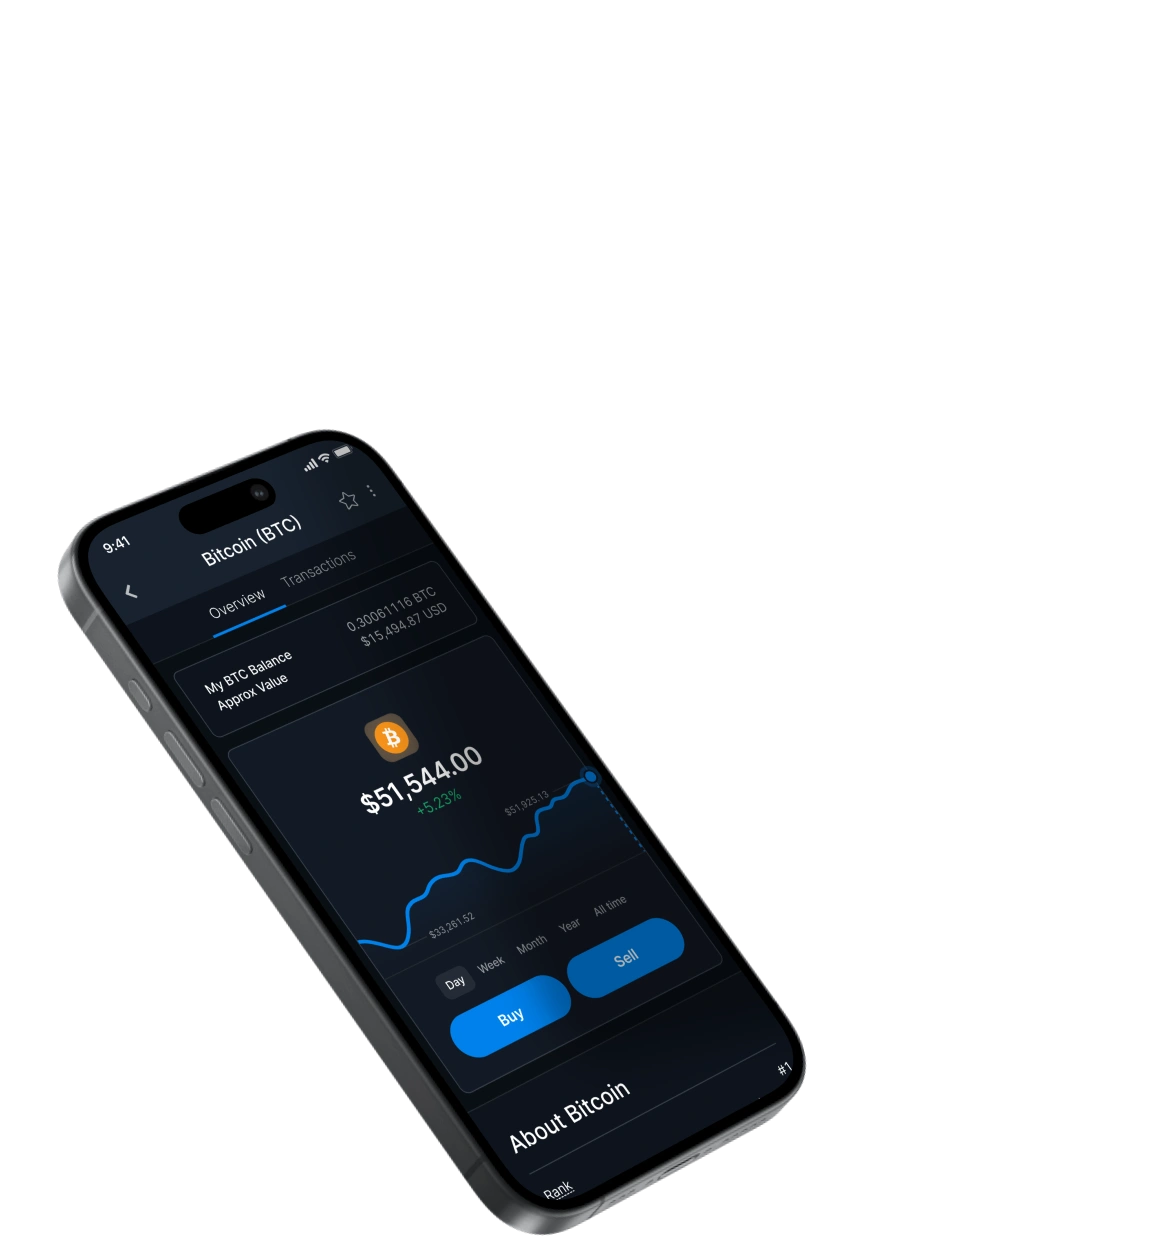 Three 3D rendered iPhone devices showing the new simplified Bittrex interface